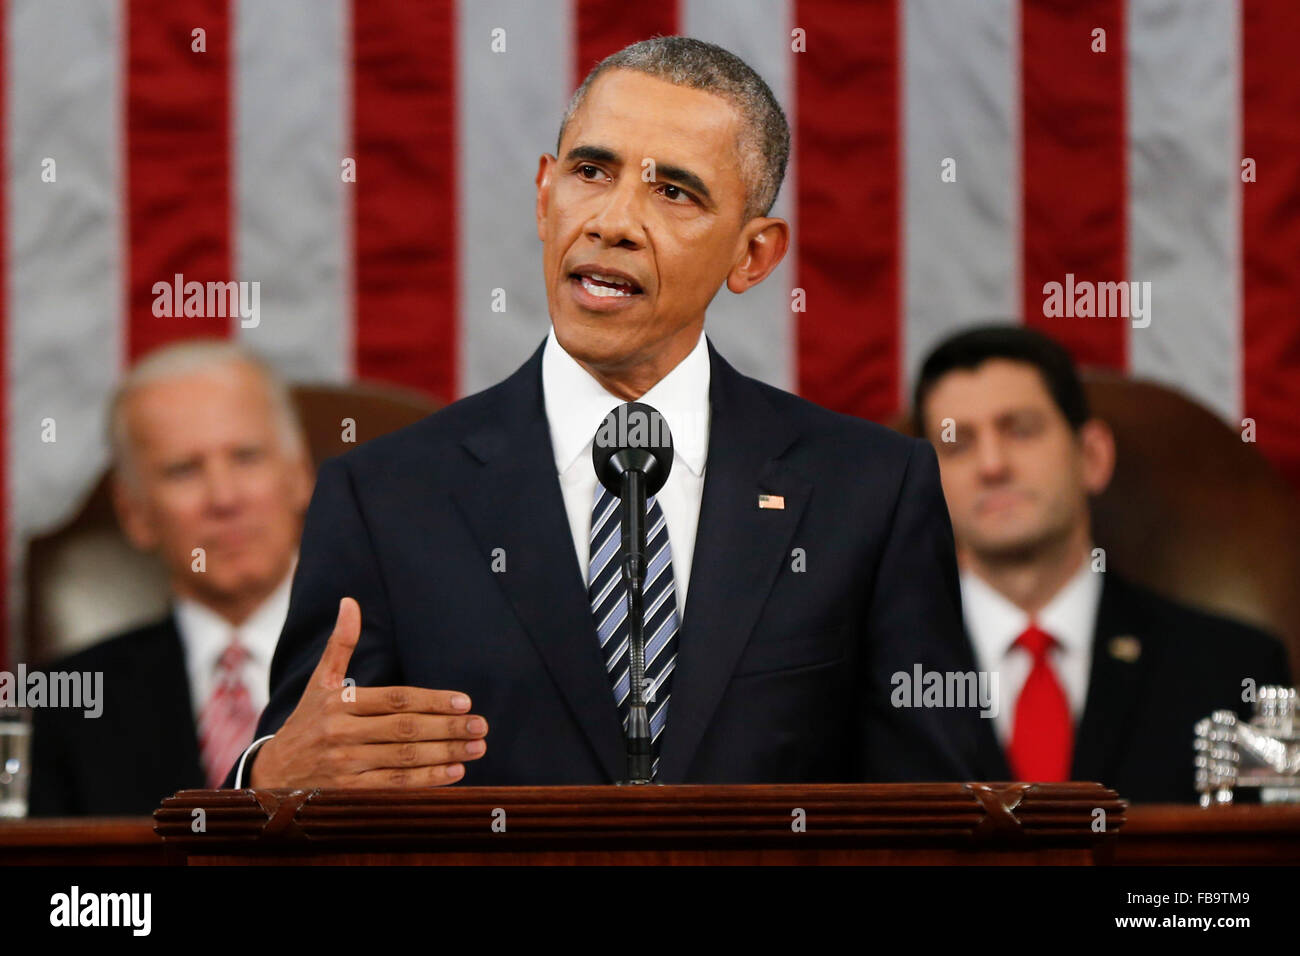 Washington DC, USA . 12th January, 2016. President Barack Obama delivers his State of the Union address before a joint session of Congress on Capitol Hill in Washington, Tuesday, Jan. 12, 2016. Credit: Evan Vucci/Pool via CNP - NO WIRE SERVICE - Credit:  dpa picture alliance/Alamy Live News Stock Photo